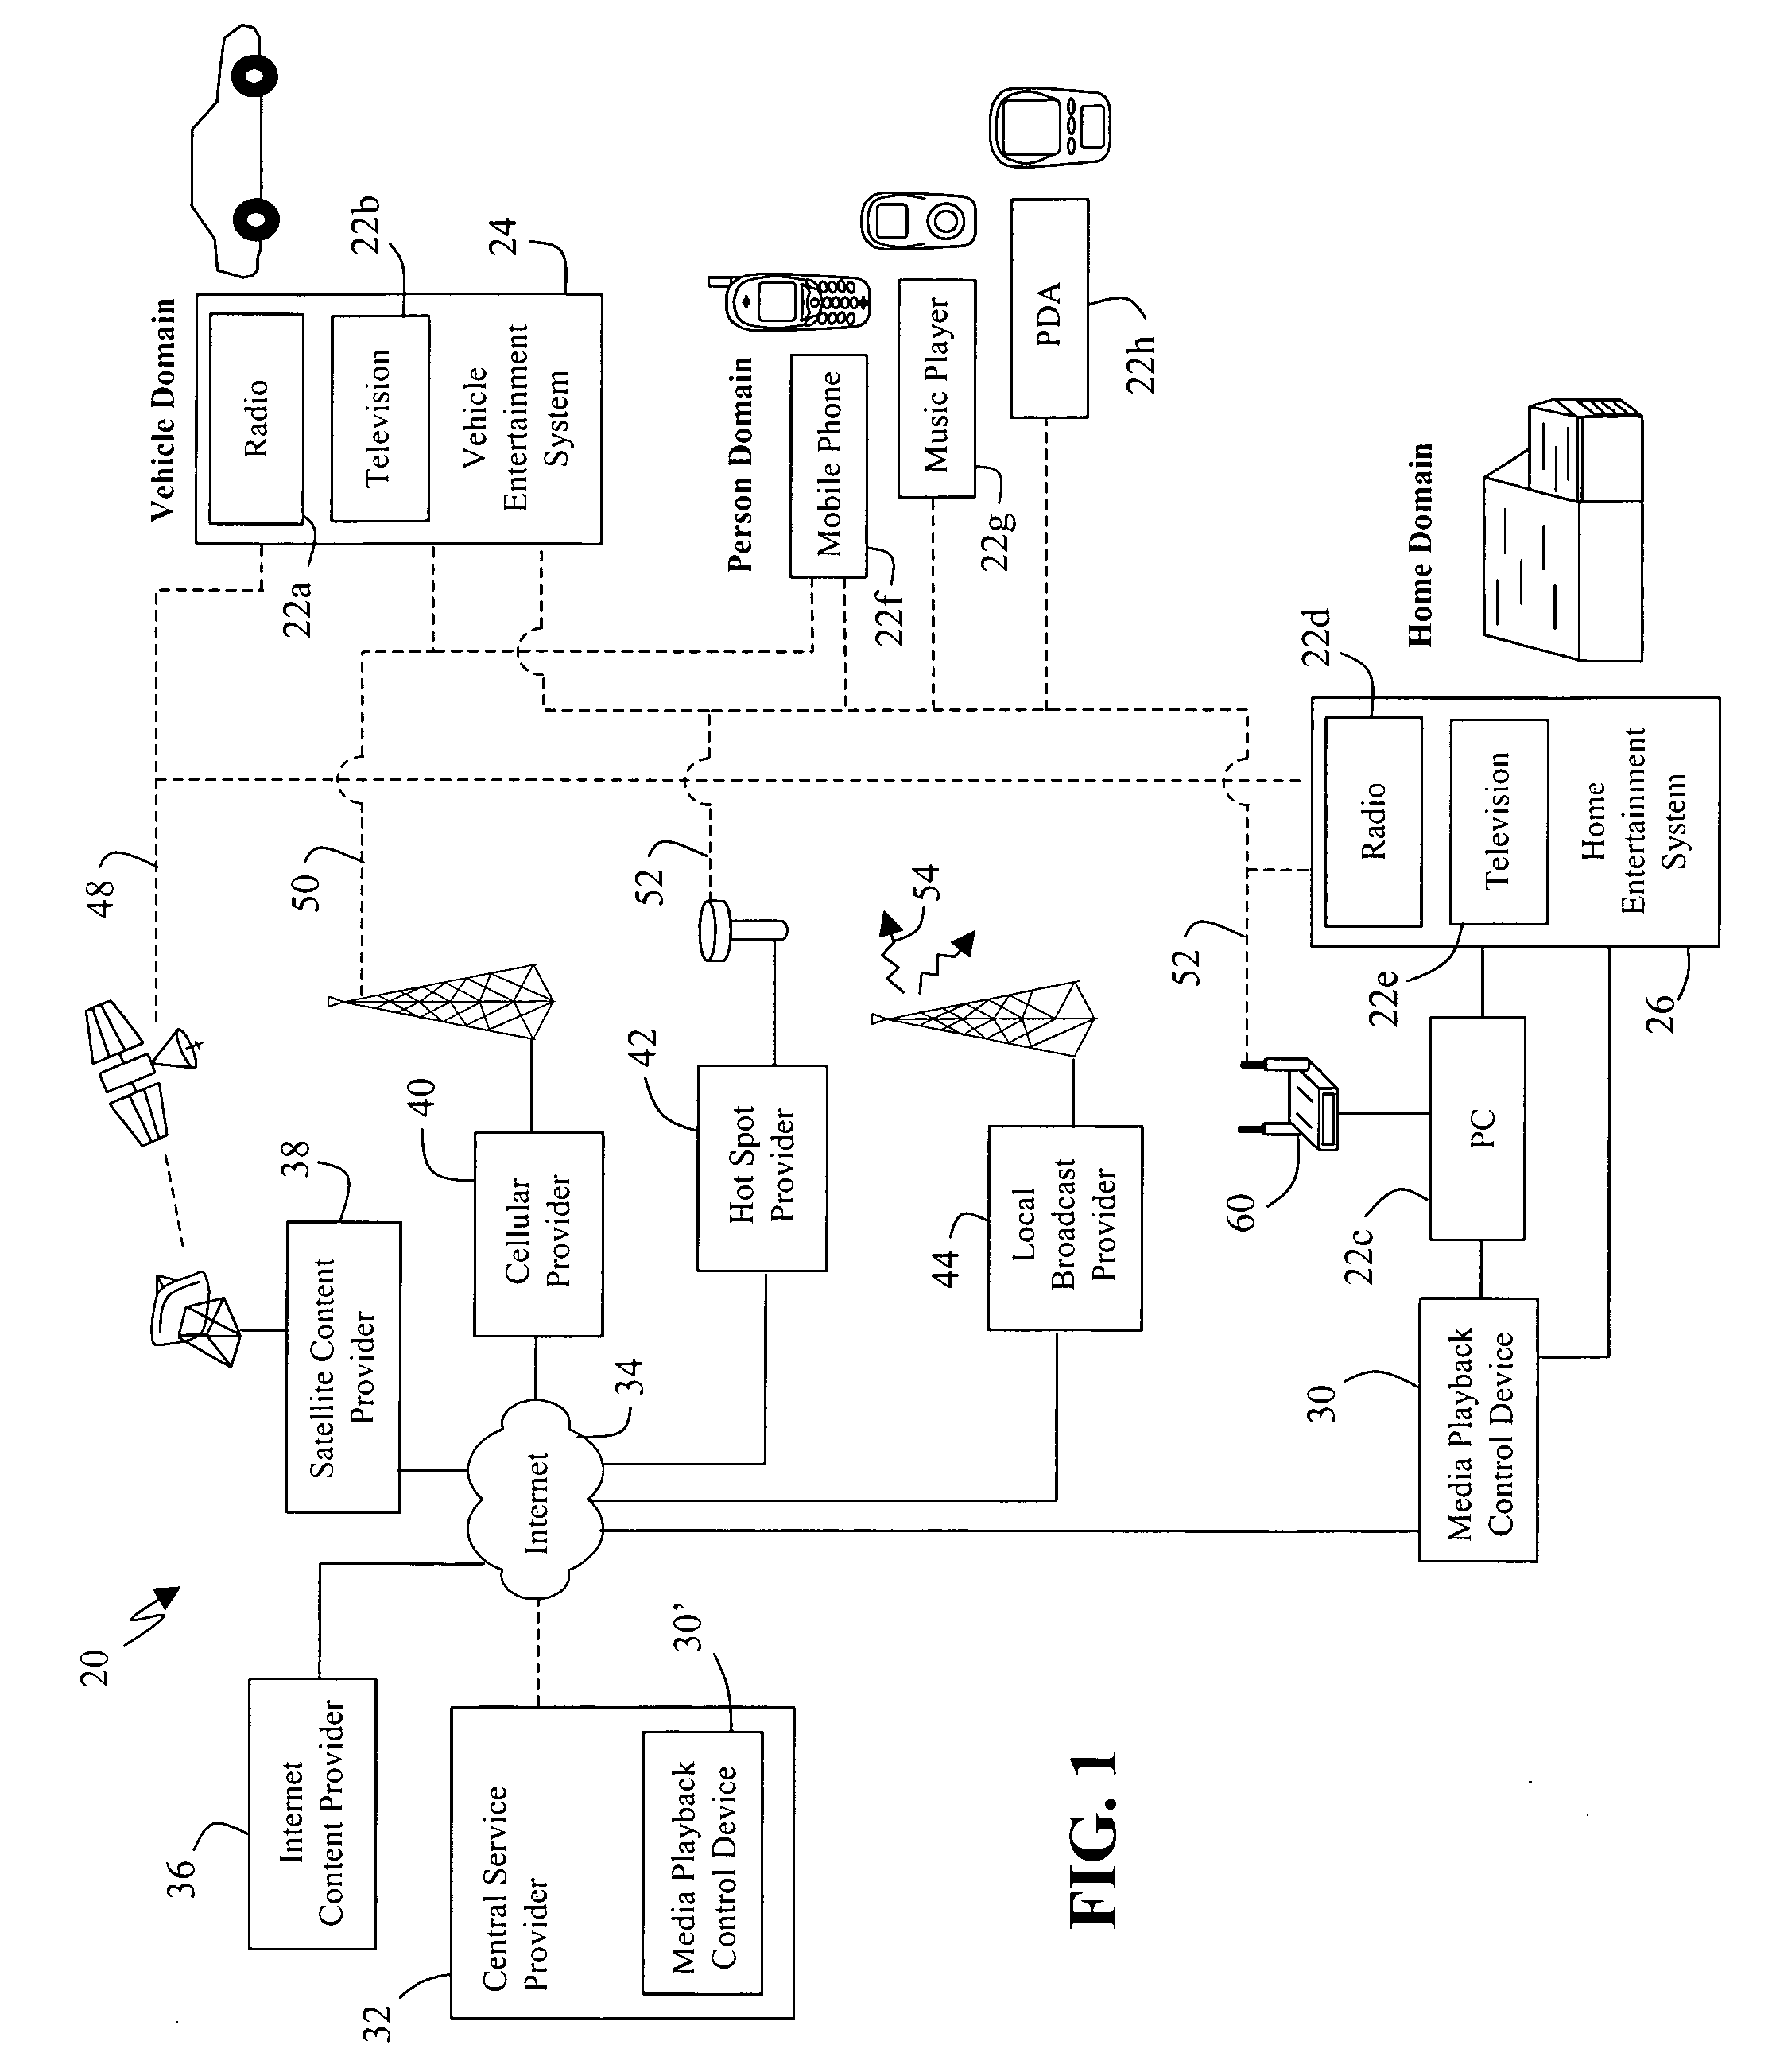 System and method for managing content between devices having different capabilities